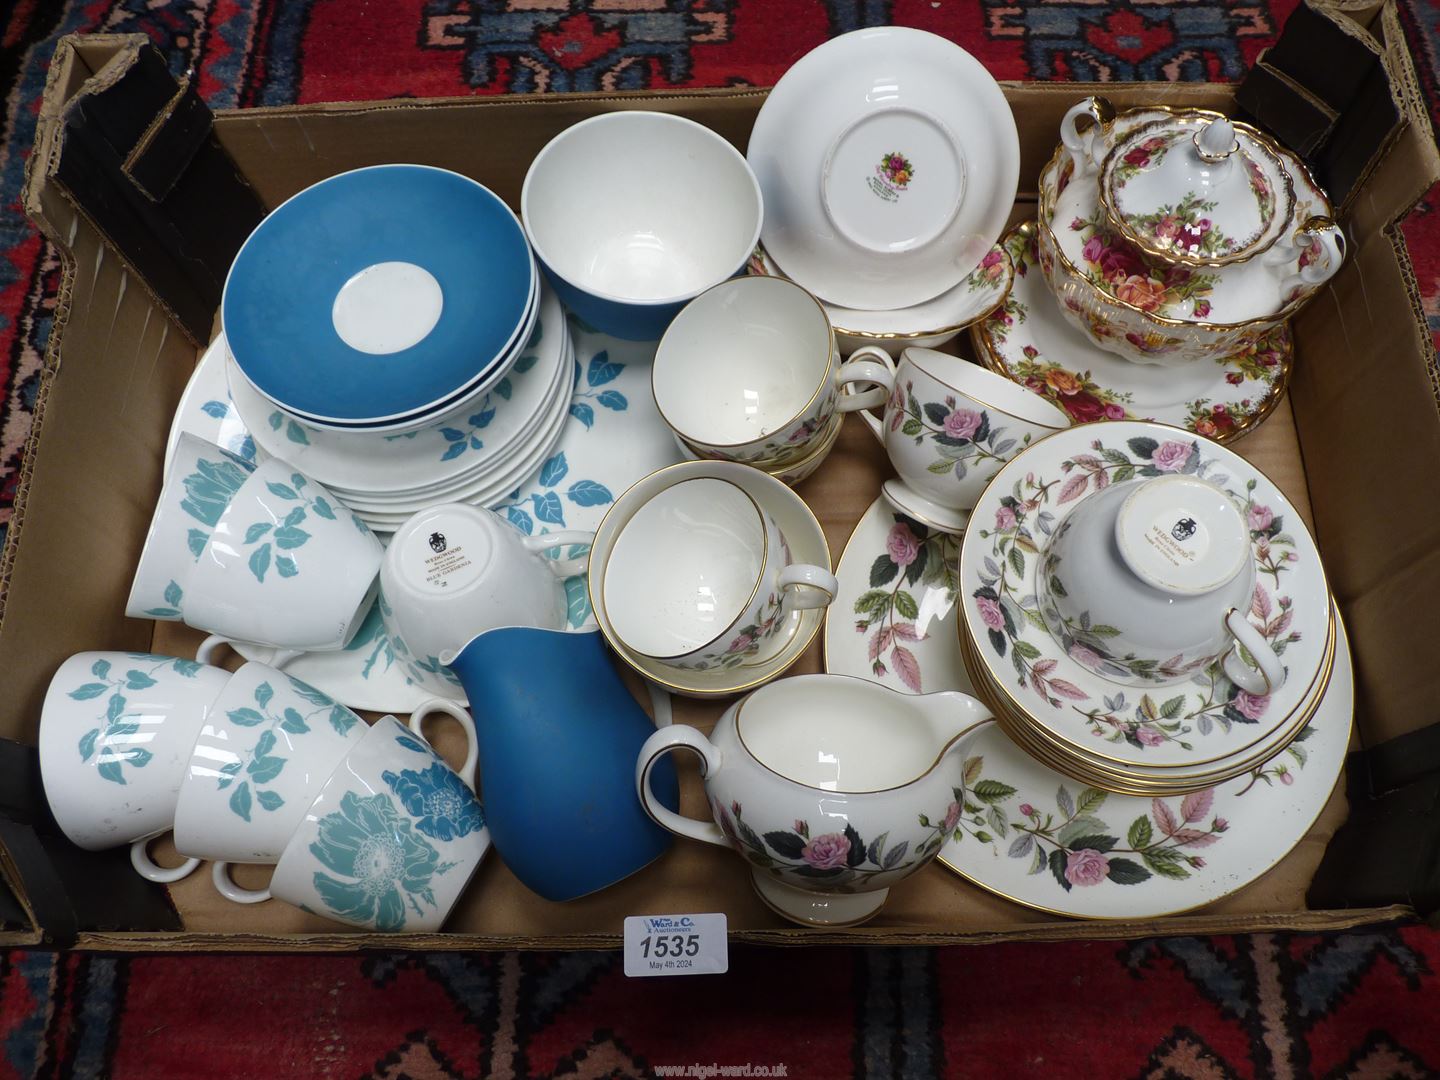 A quantity of part teasets including Wedgwood "Hathaway Rose" and "Gardenia" and Royal Albert "Old